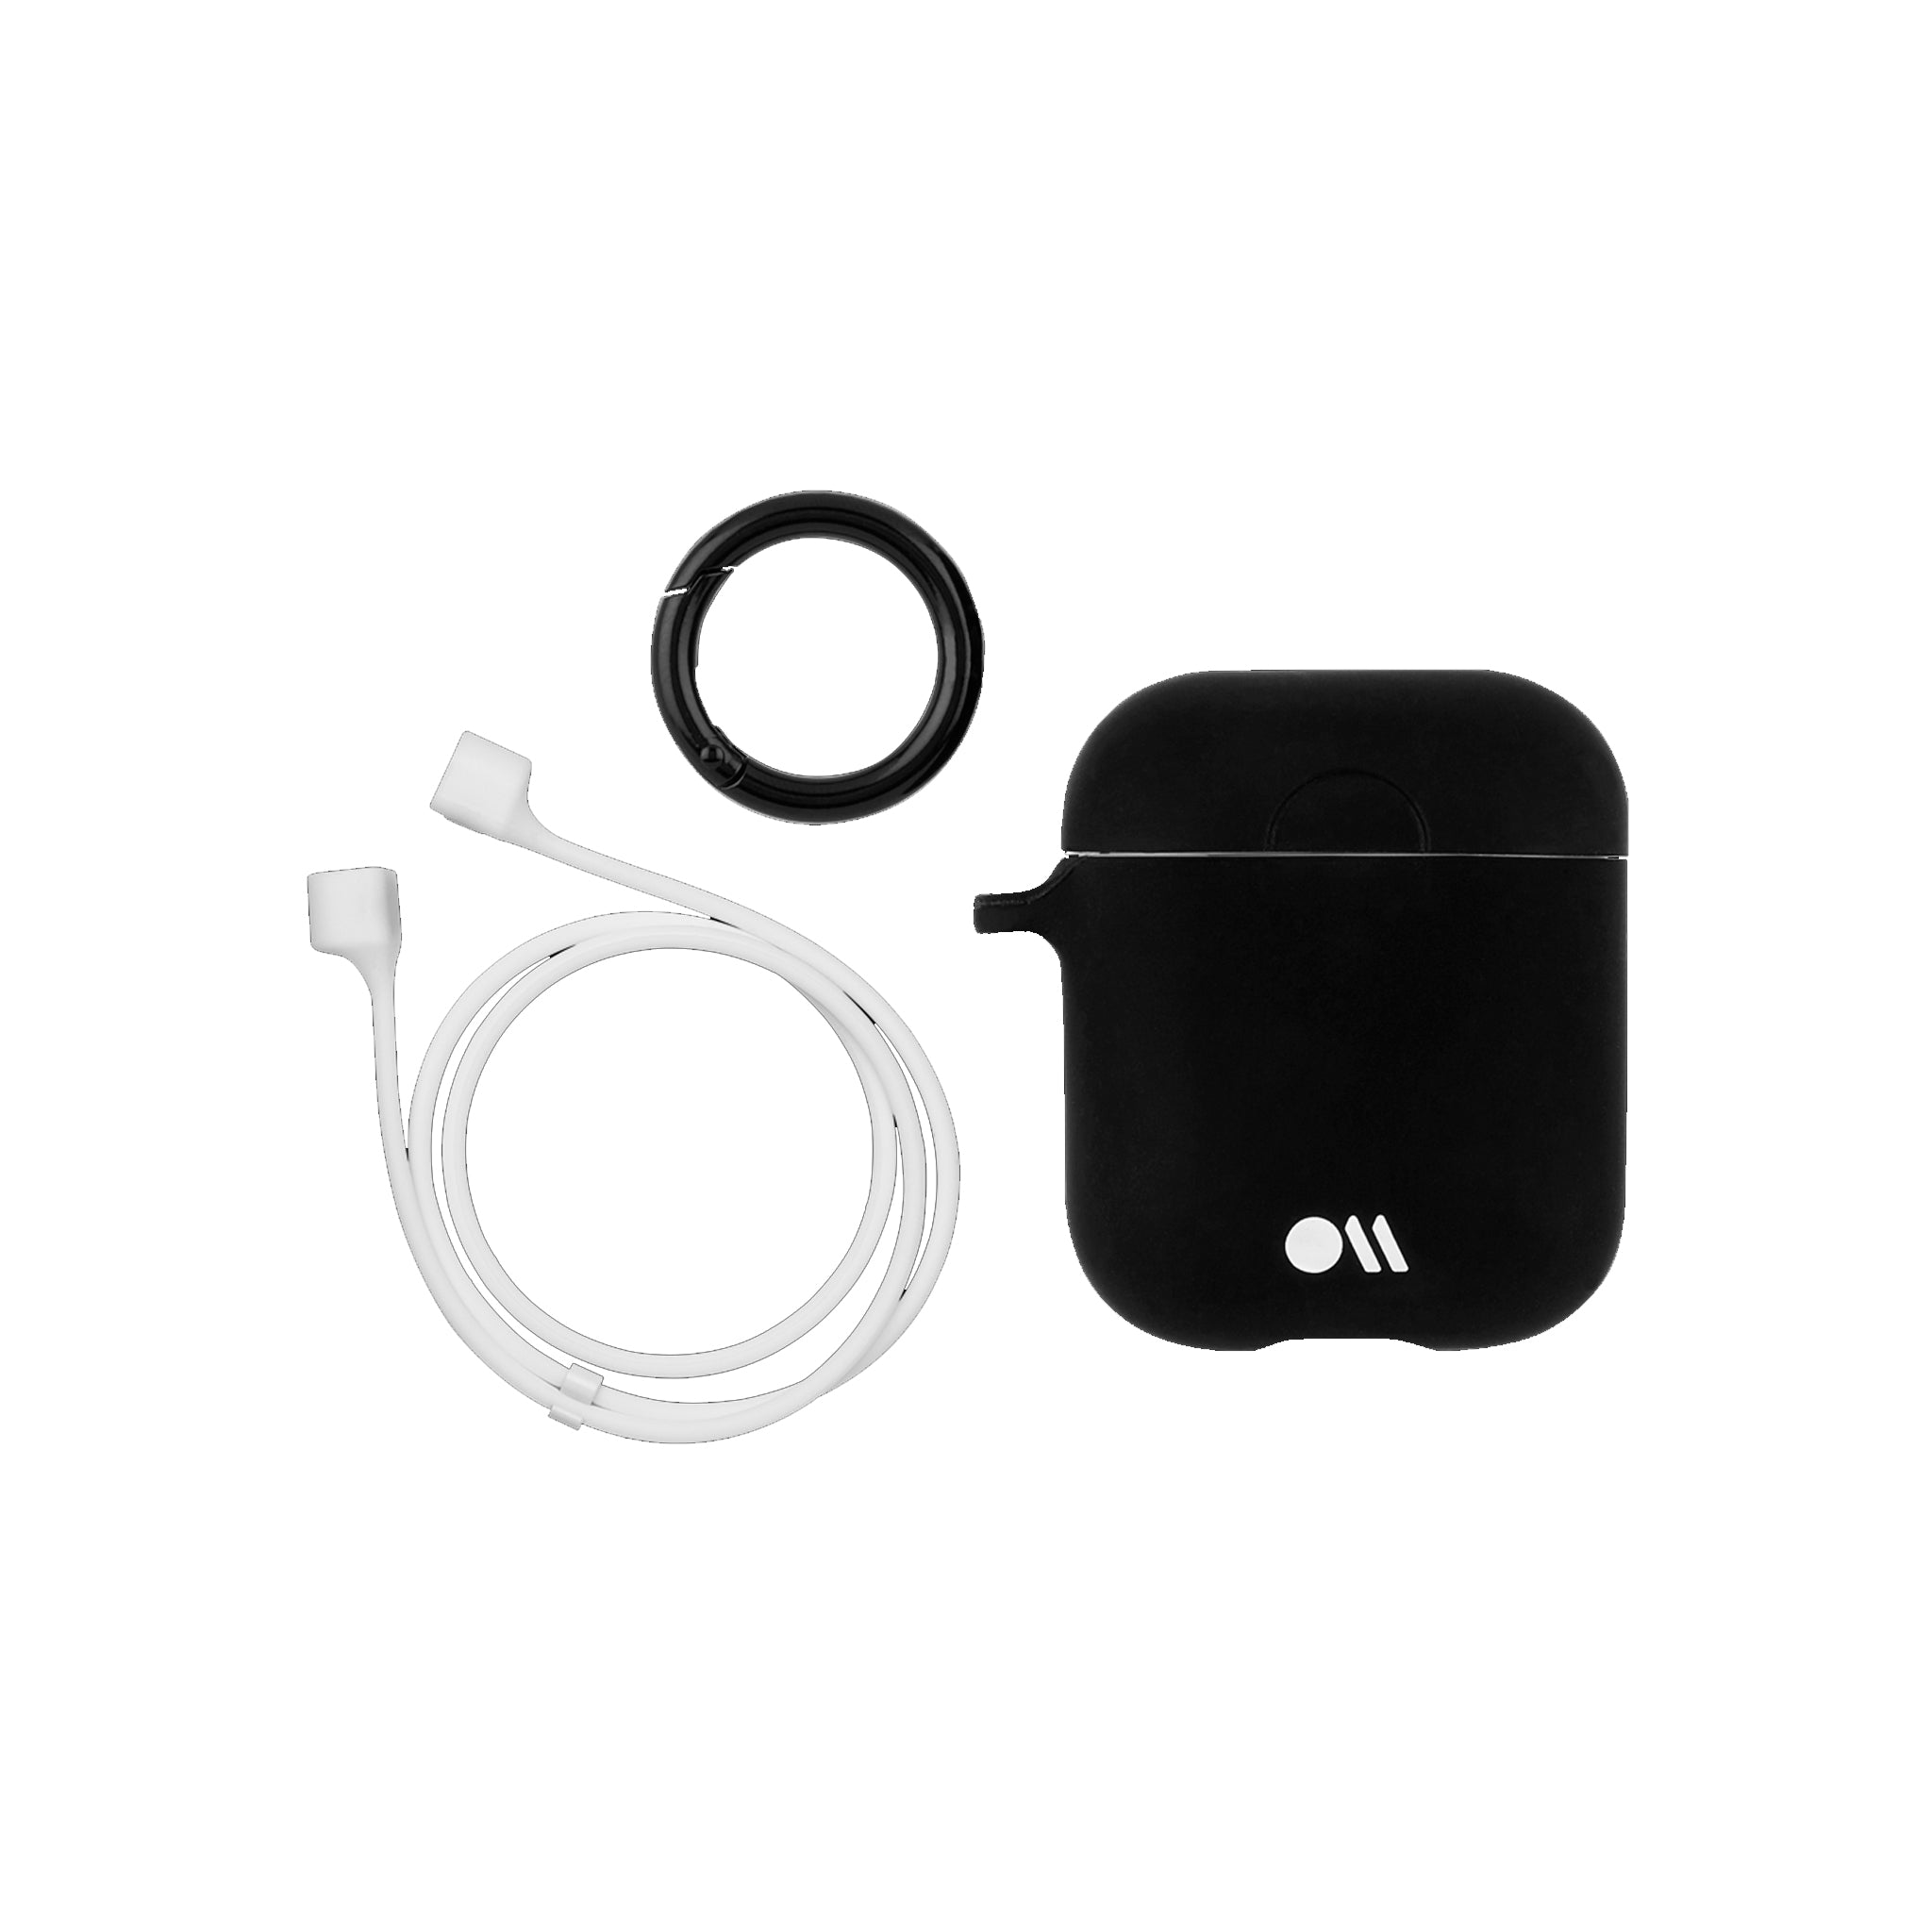 Case-mate - Hook Ups Case With Neck Strap For Apple Airpods - Black